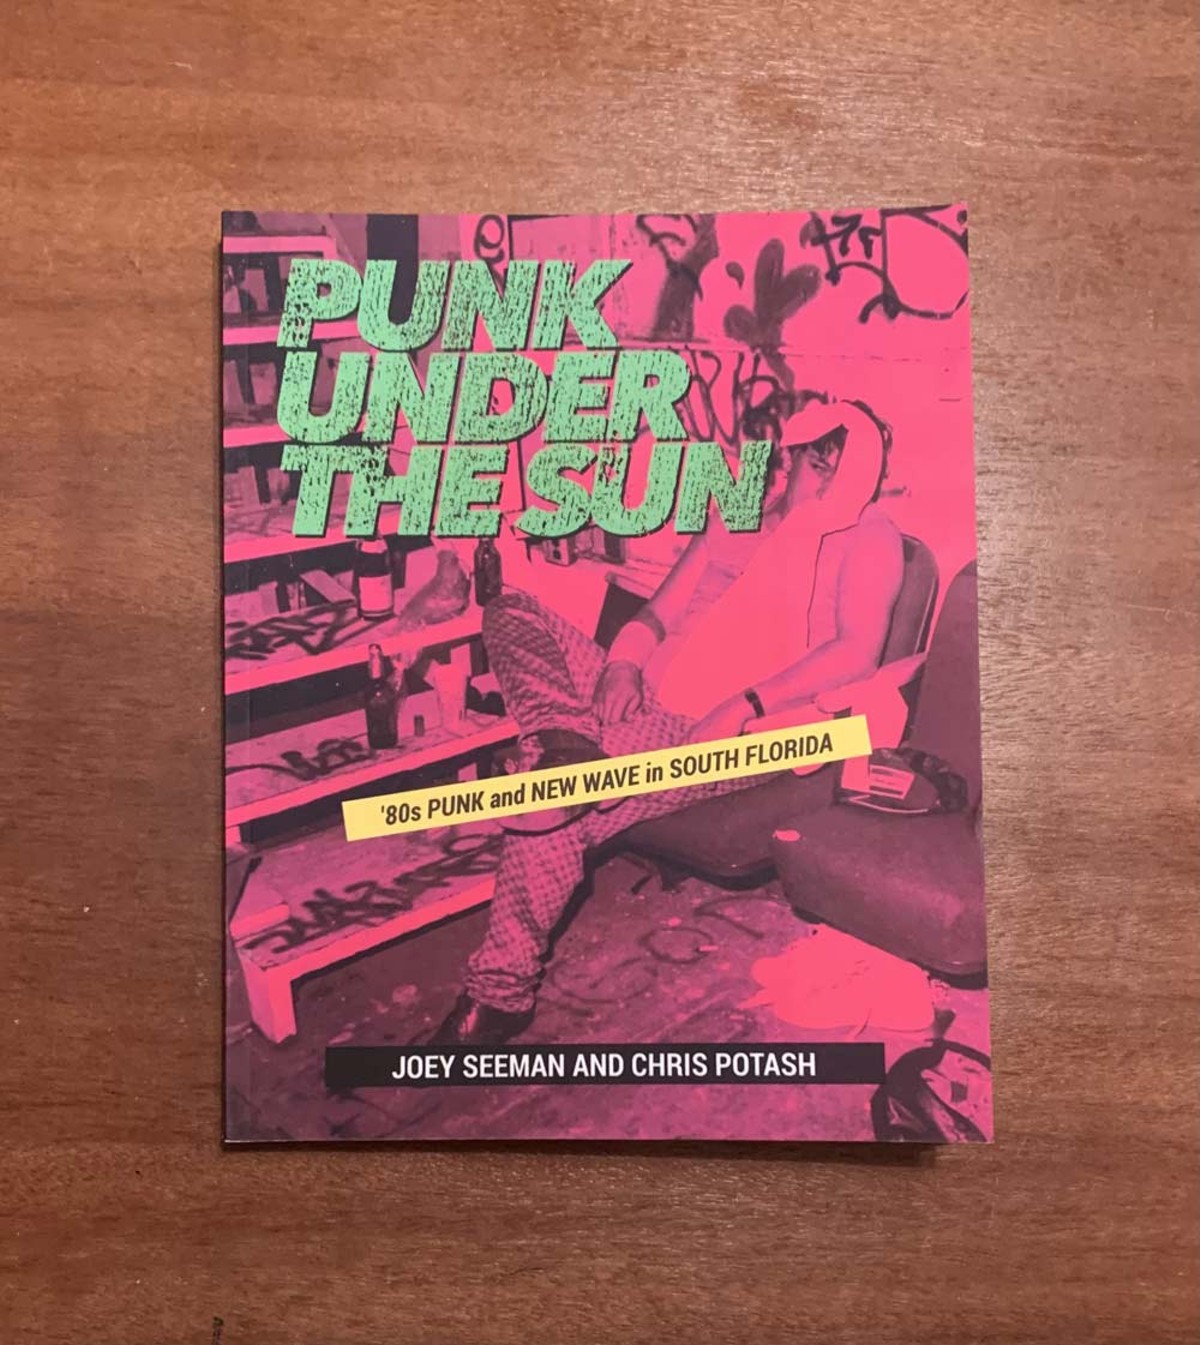 "Punk Under the Sun: '80s Punk and New Wave in South Florida"